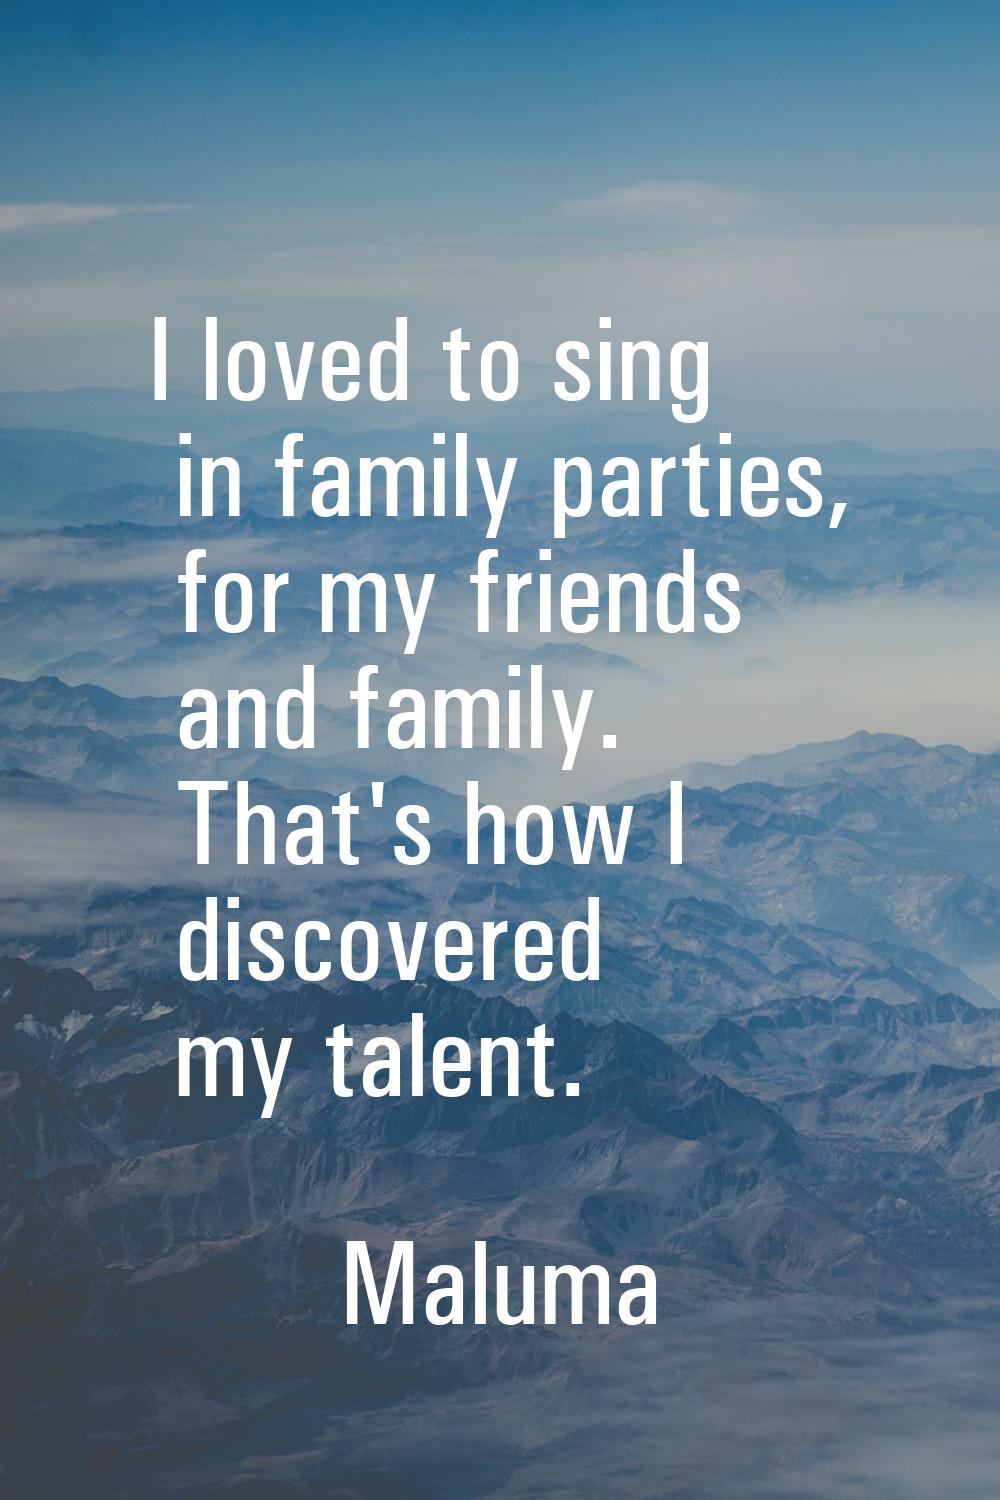 I loved to sing in family parties, for my friends and family. That's how I discovered my talent.